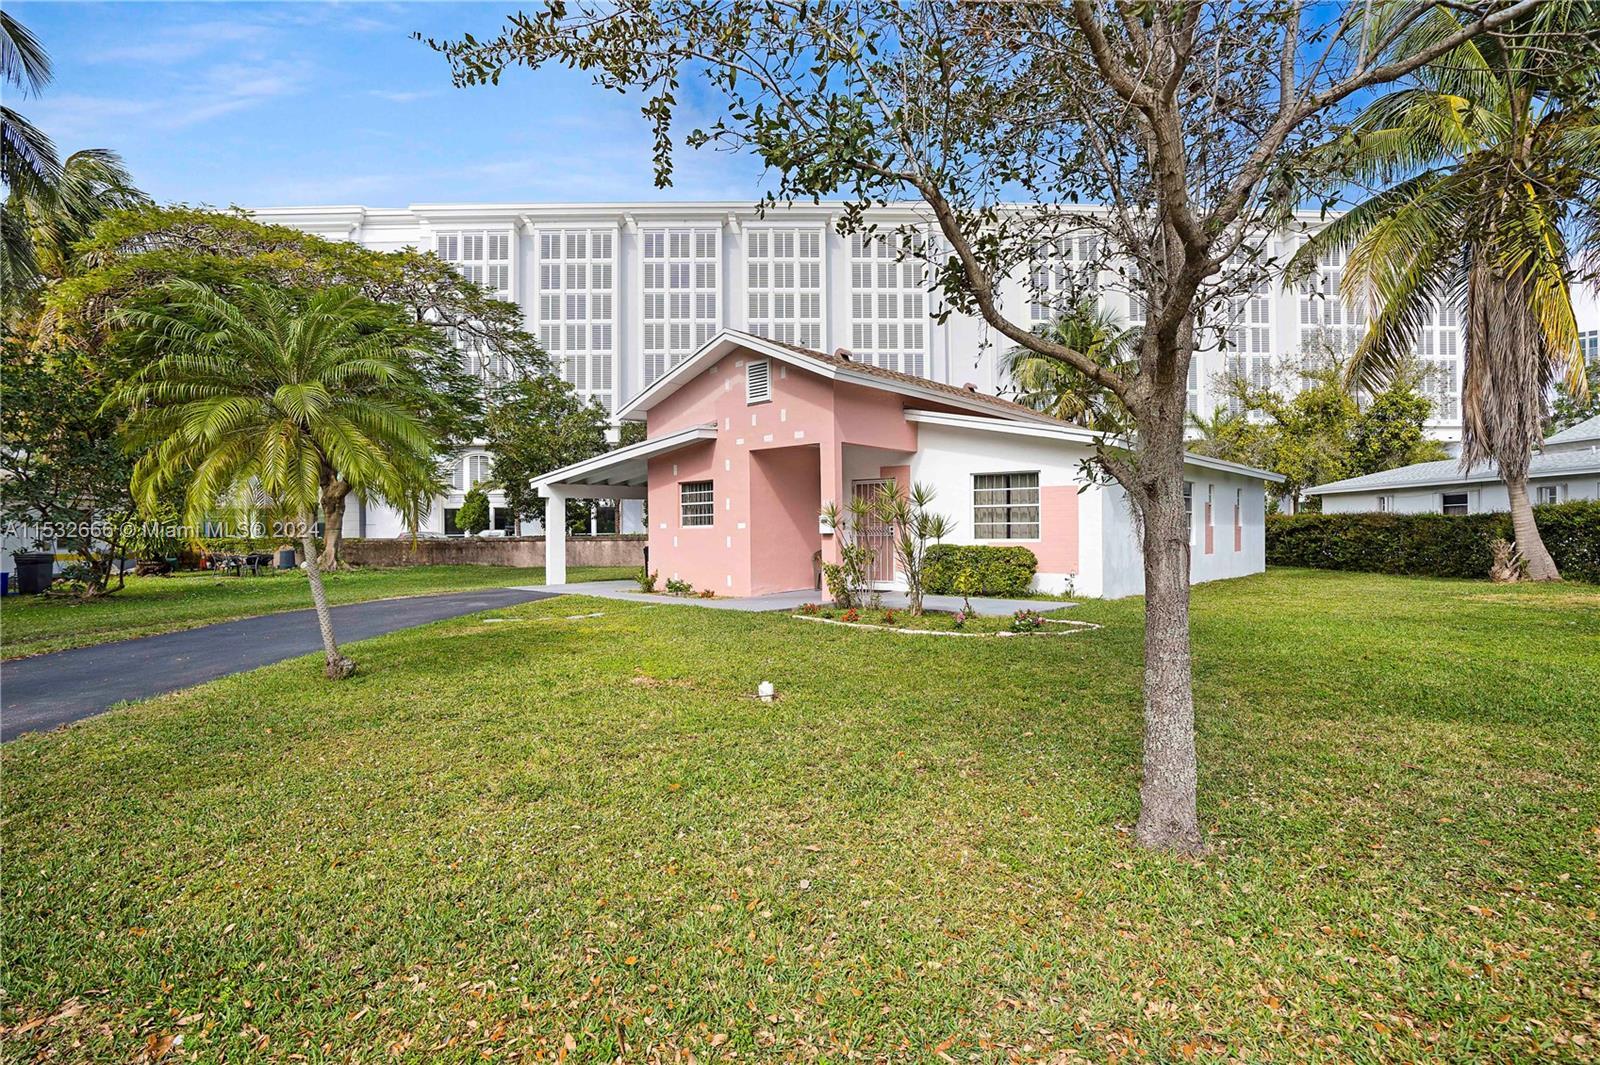 Nestled in the desirable Coral Gables neighborhood, this 3 bedroom, 2 bathroom home offer both comfo